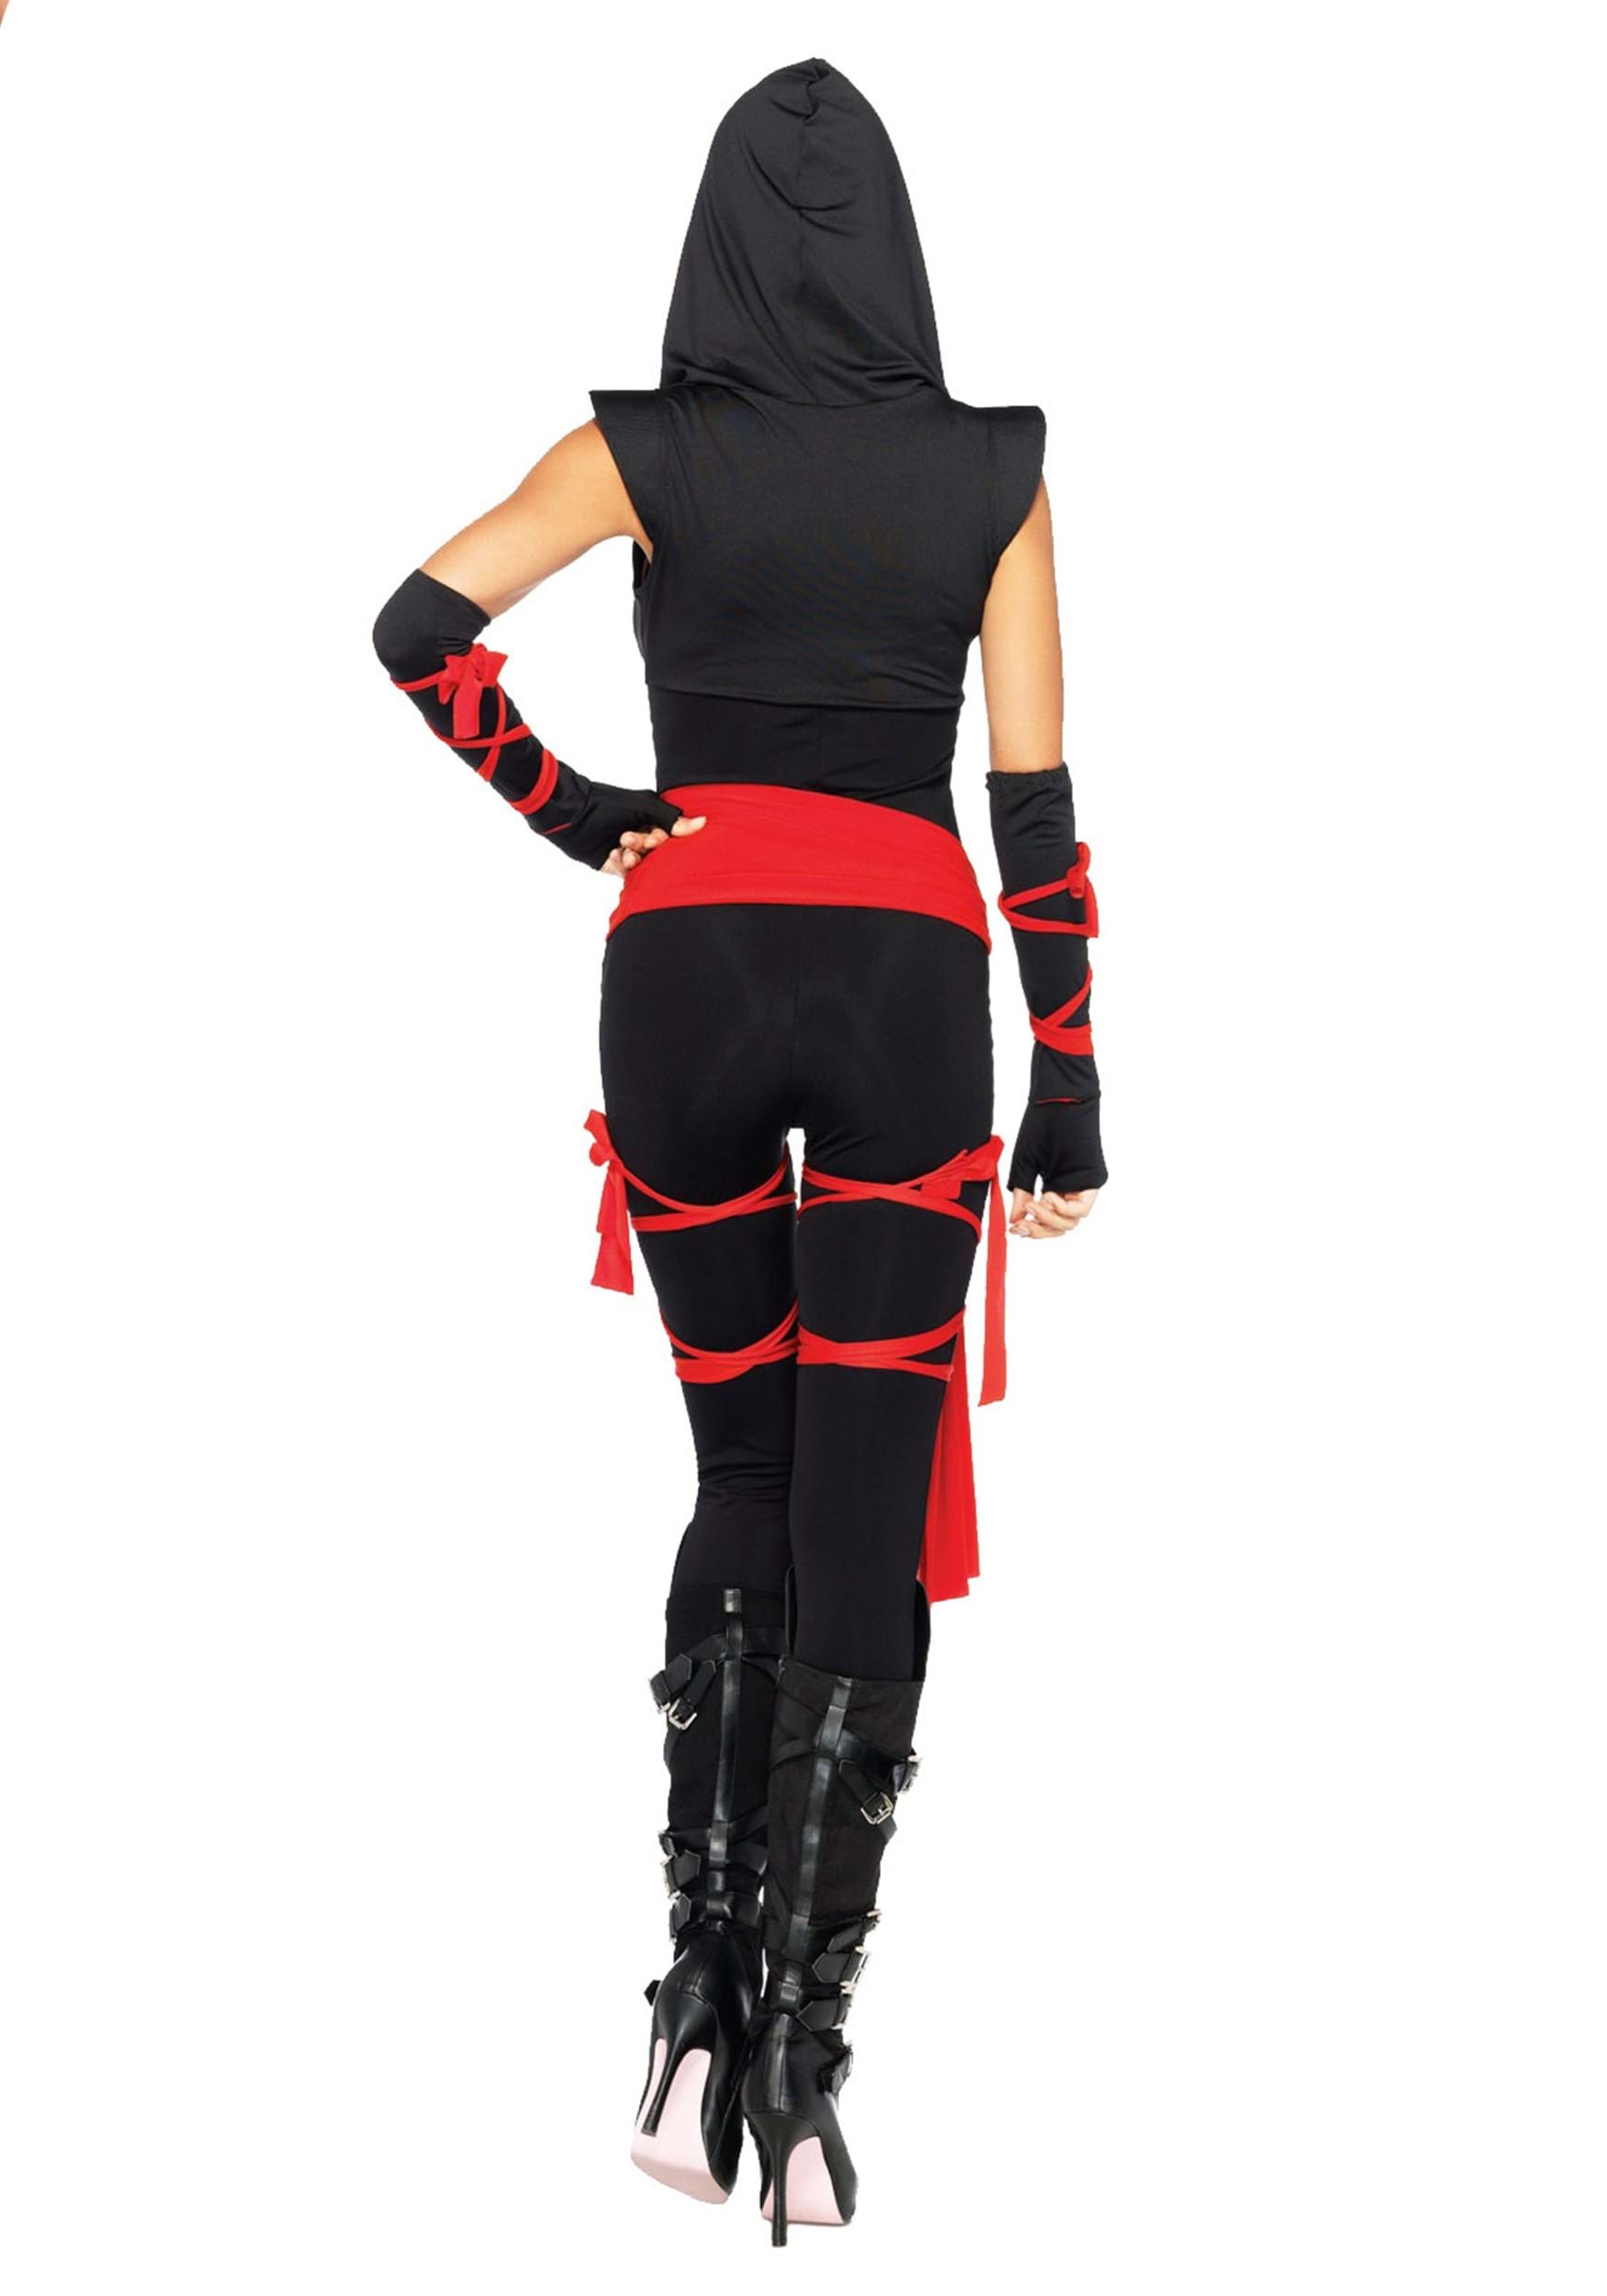 https://images.fun.co.uk/products/14257/2-1-296391/sexy-deadly-ninja-costume-alt-7.jpg